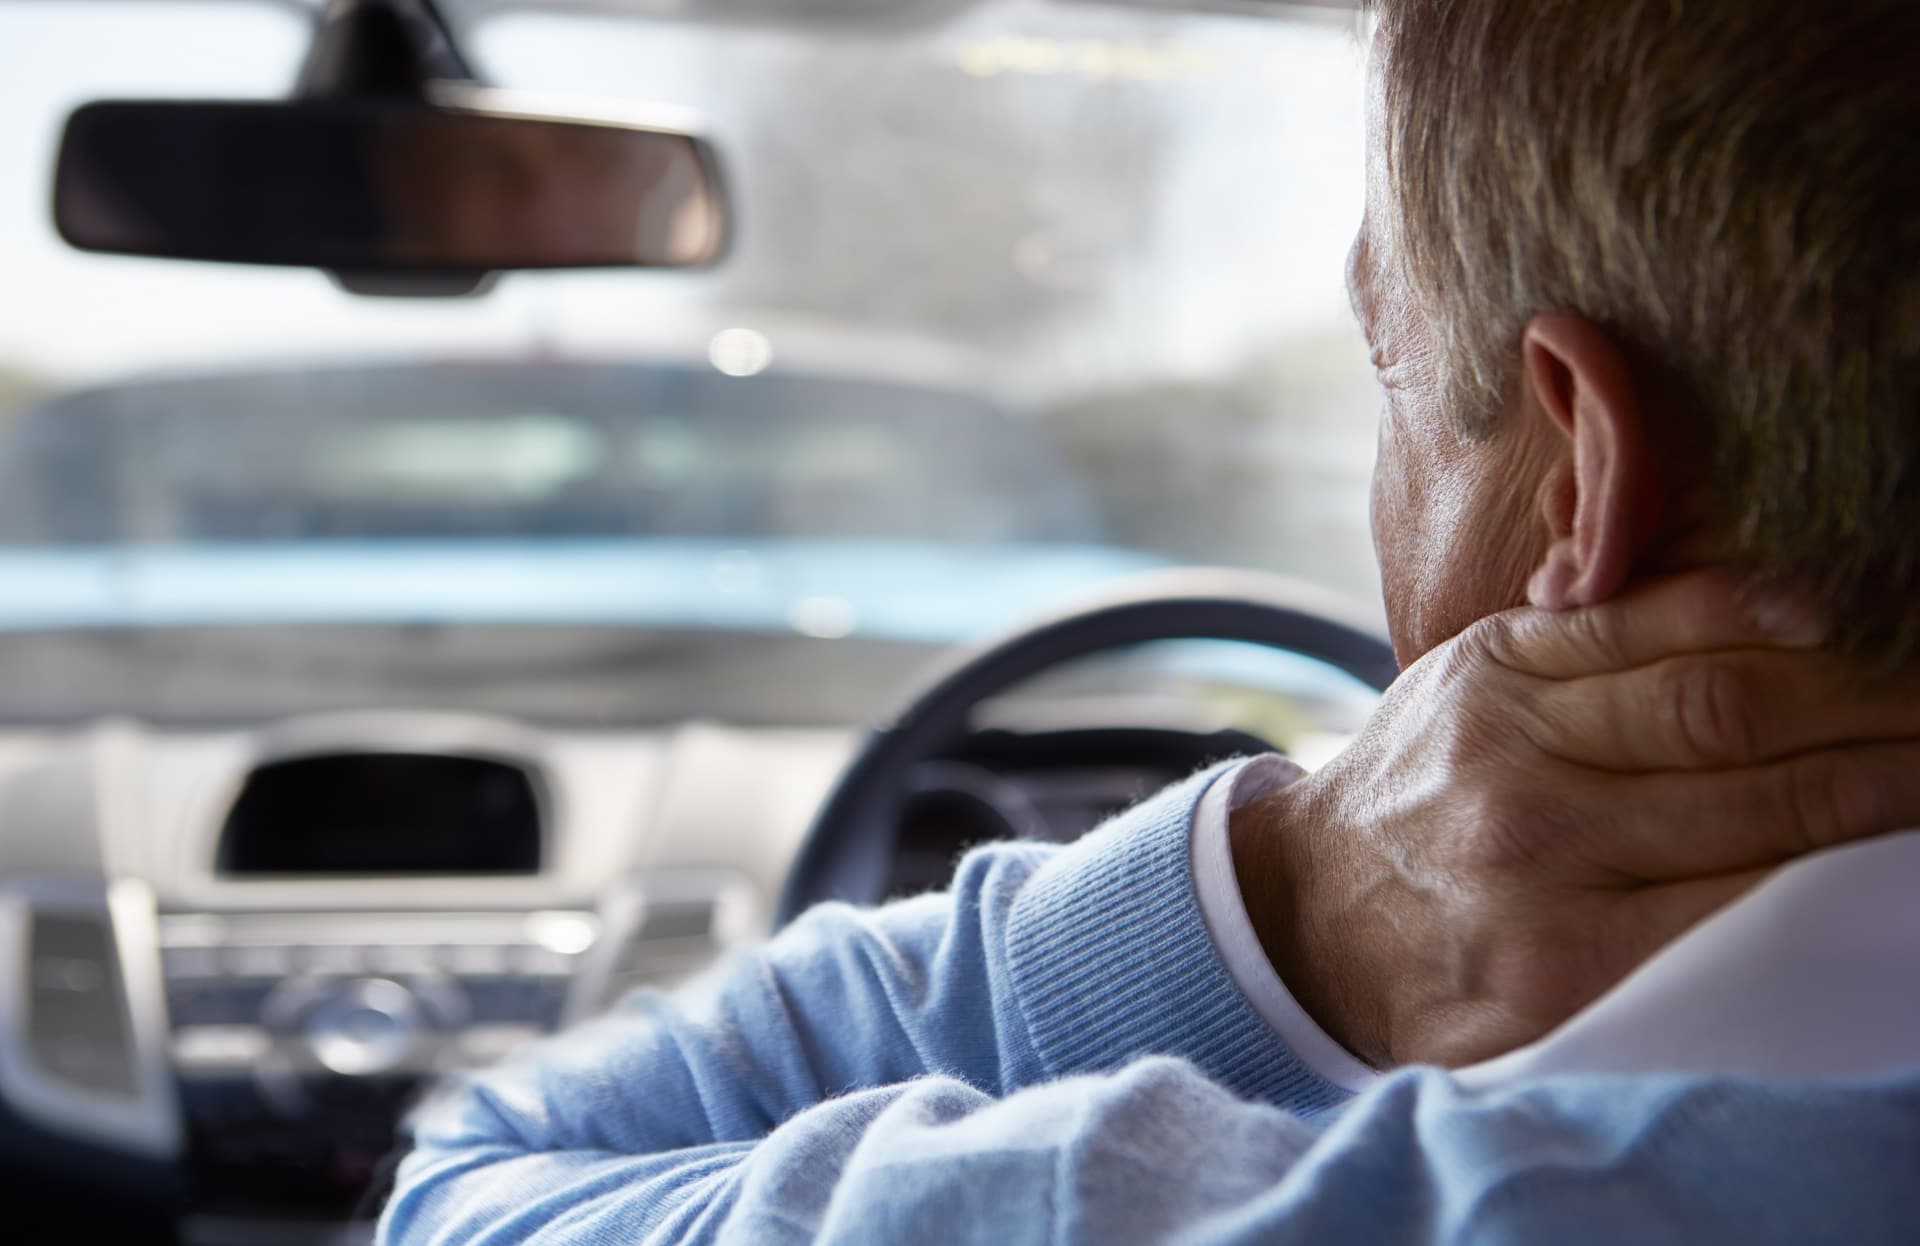 Driver sustains neck injury in car crash | motor vehicle accidents lawyer | Gash & Associates, P.C.